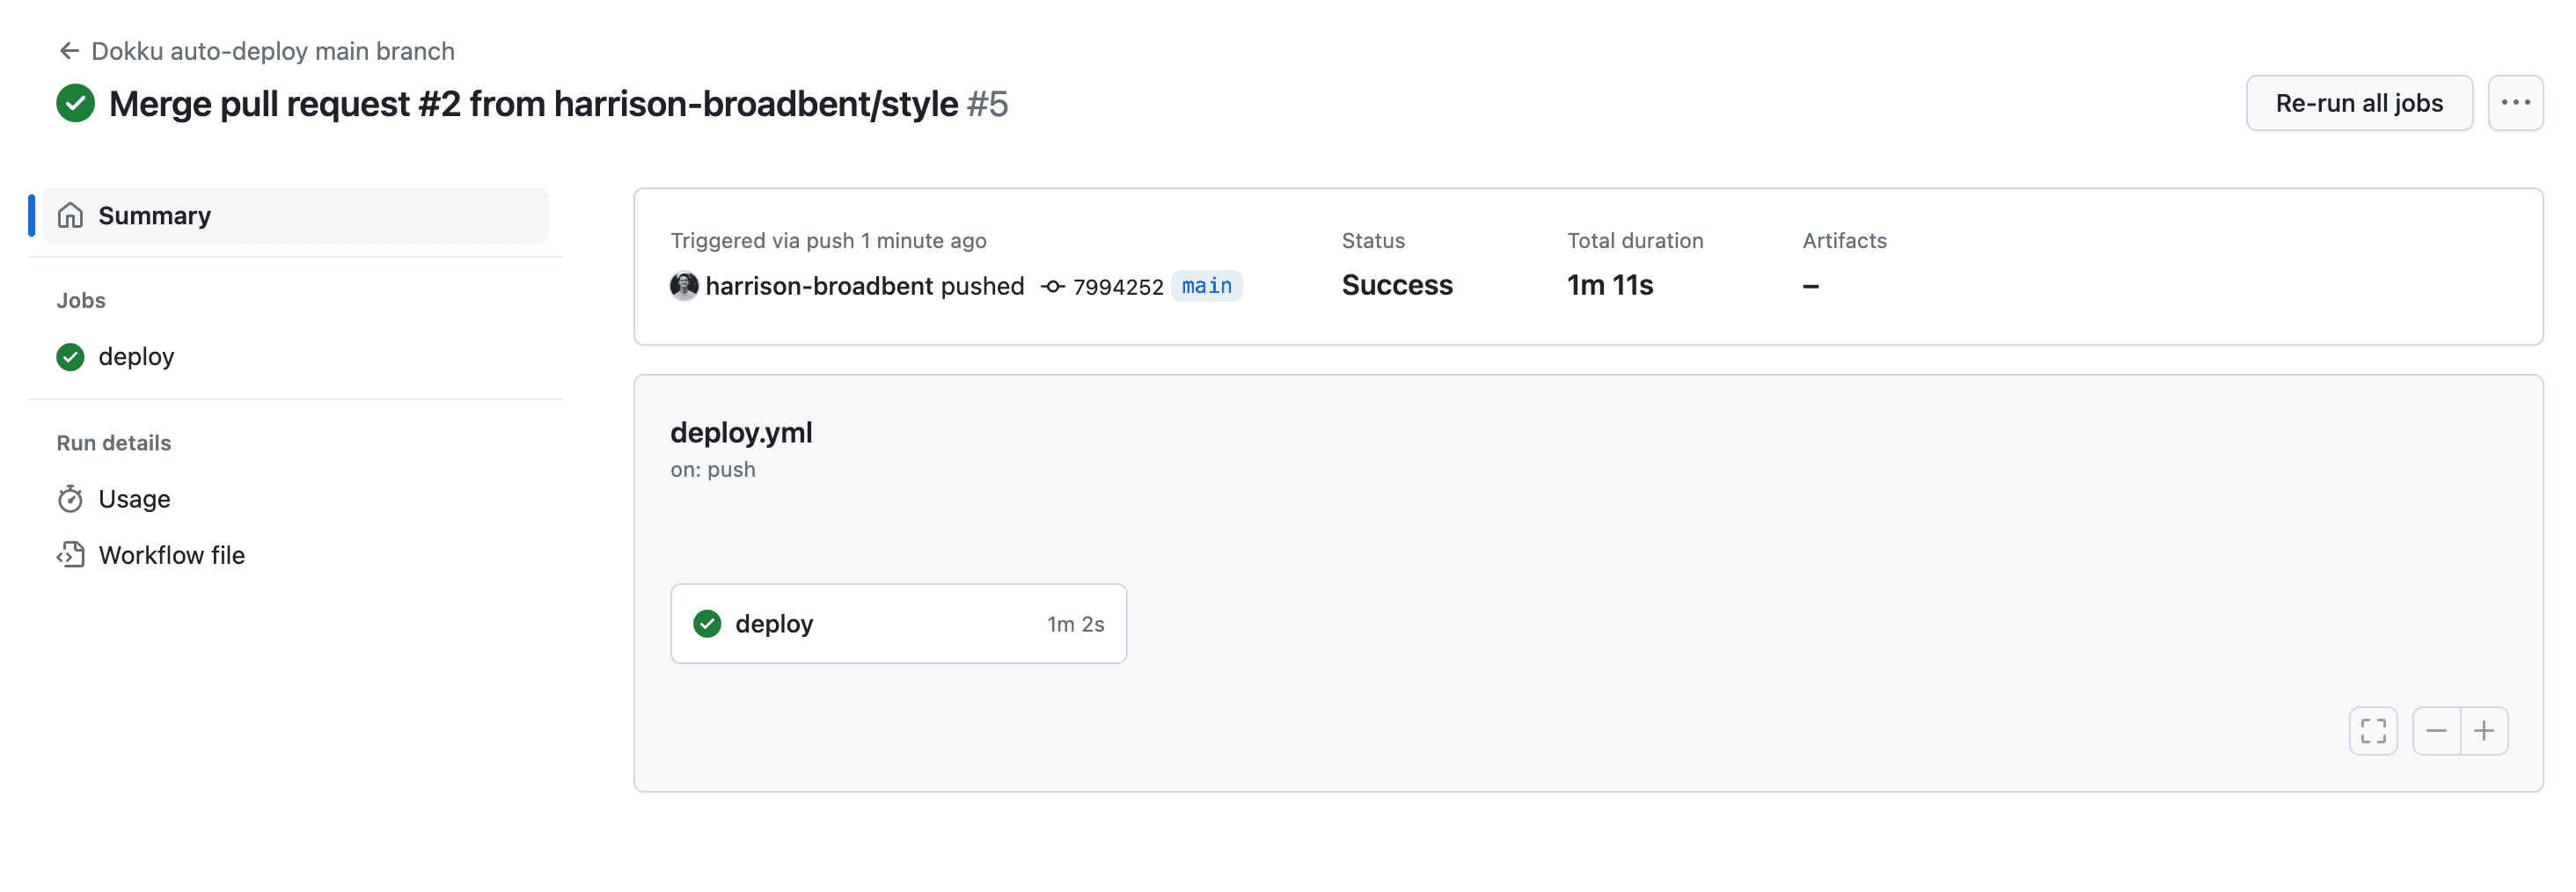 Our GitHub actions will run and deploy our app